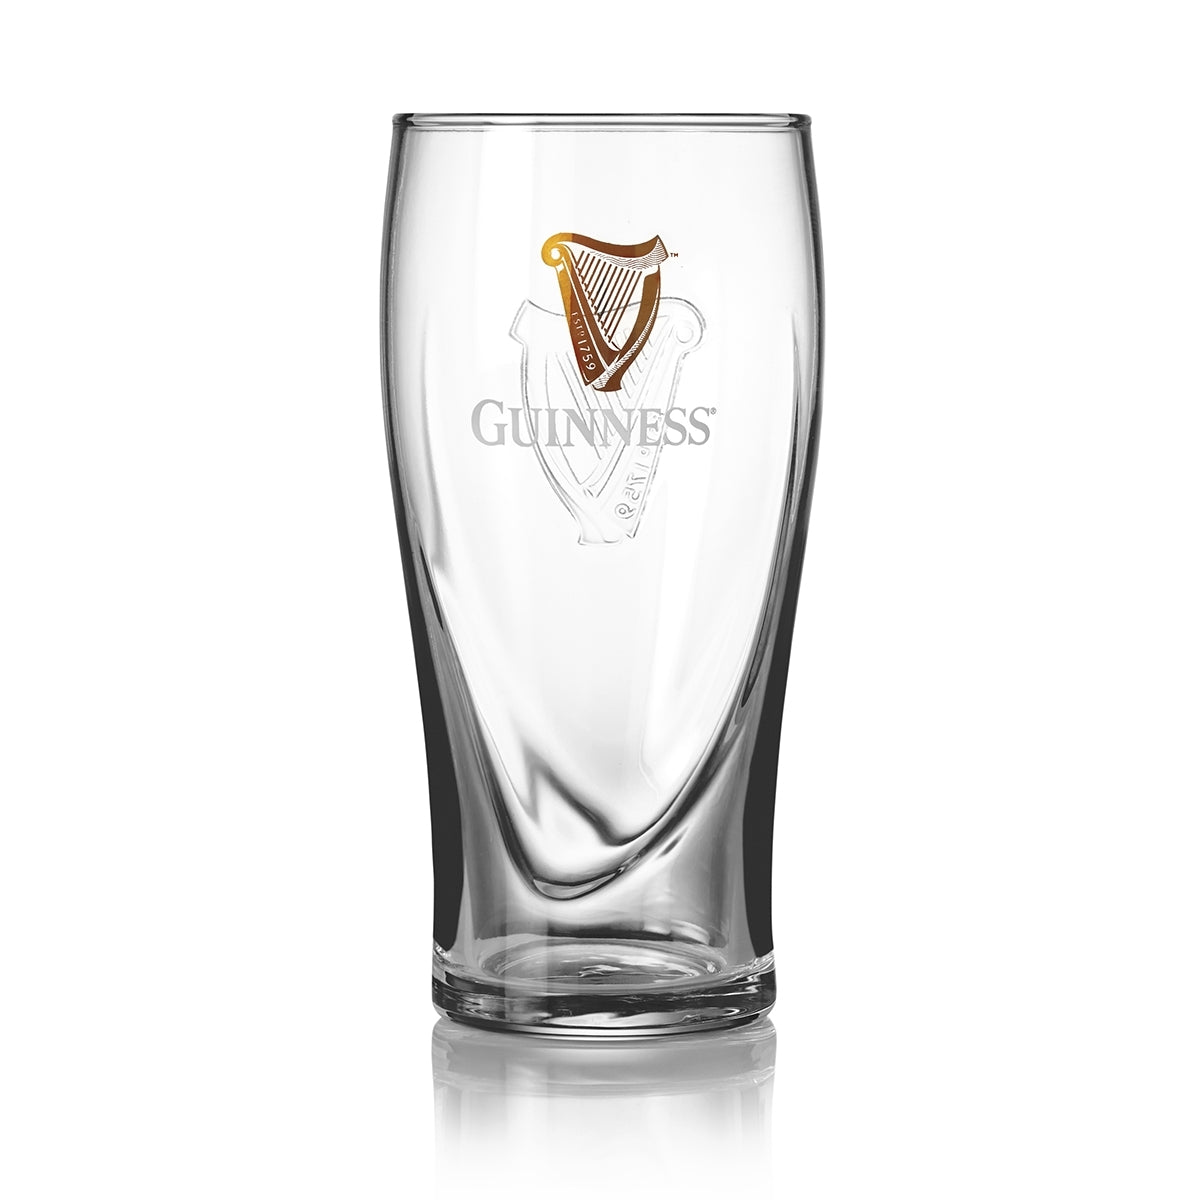 A Guinness Pint Glass 12 Pack featuring an embossed harp design and personalized engraving on a clean white background.